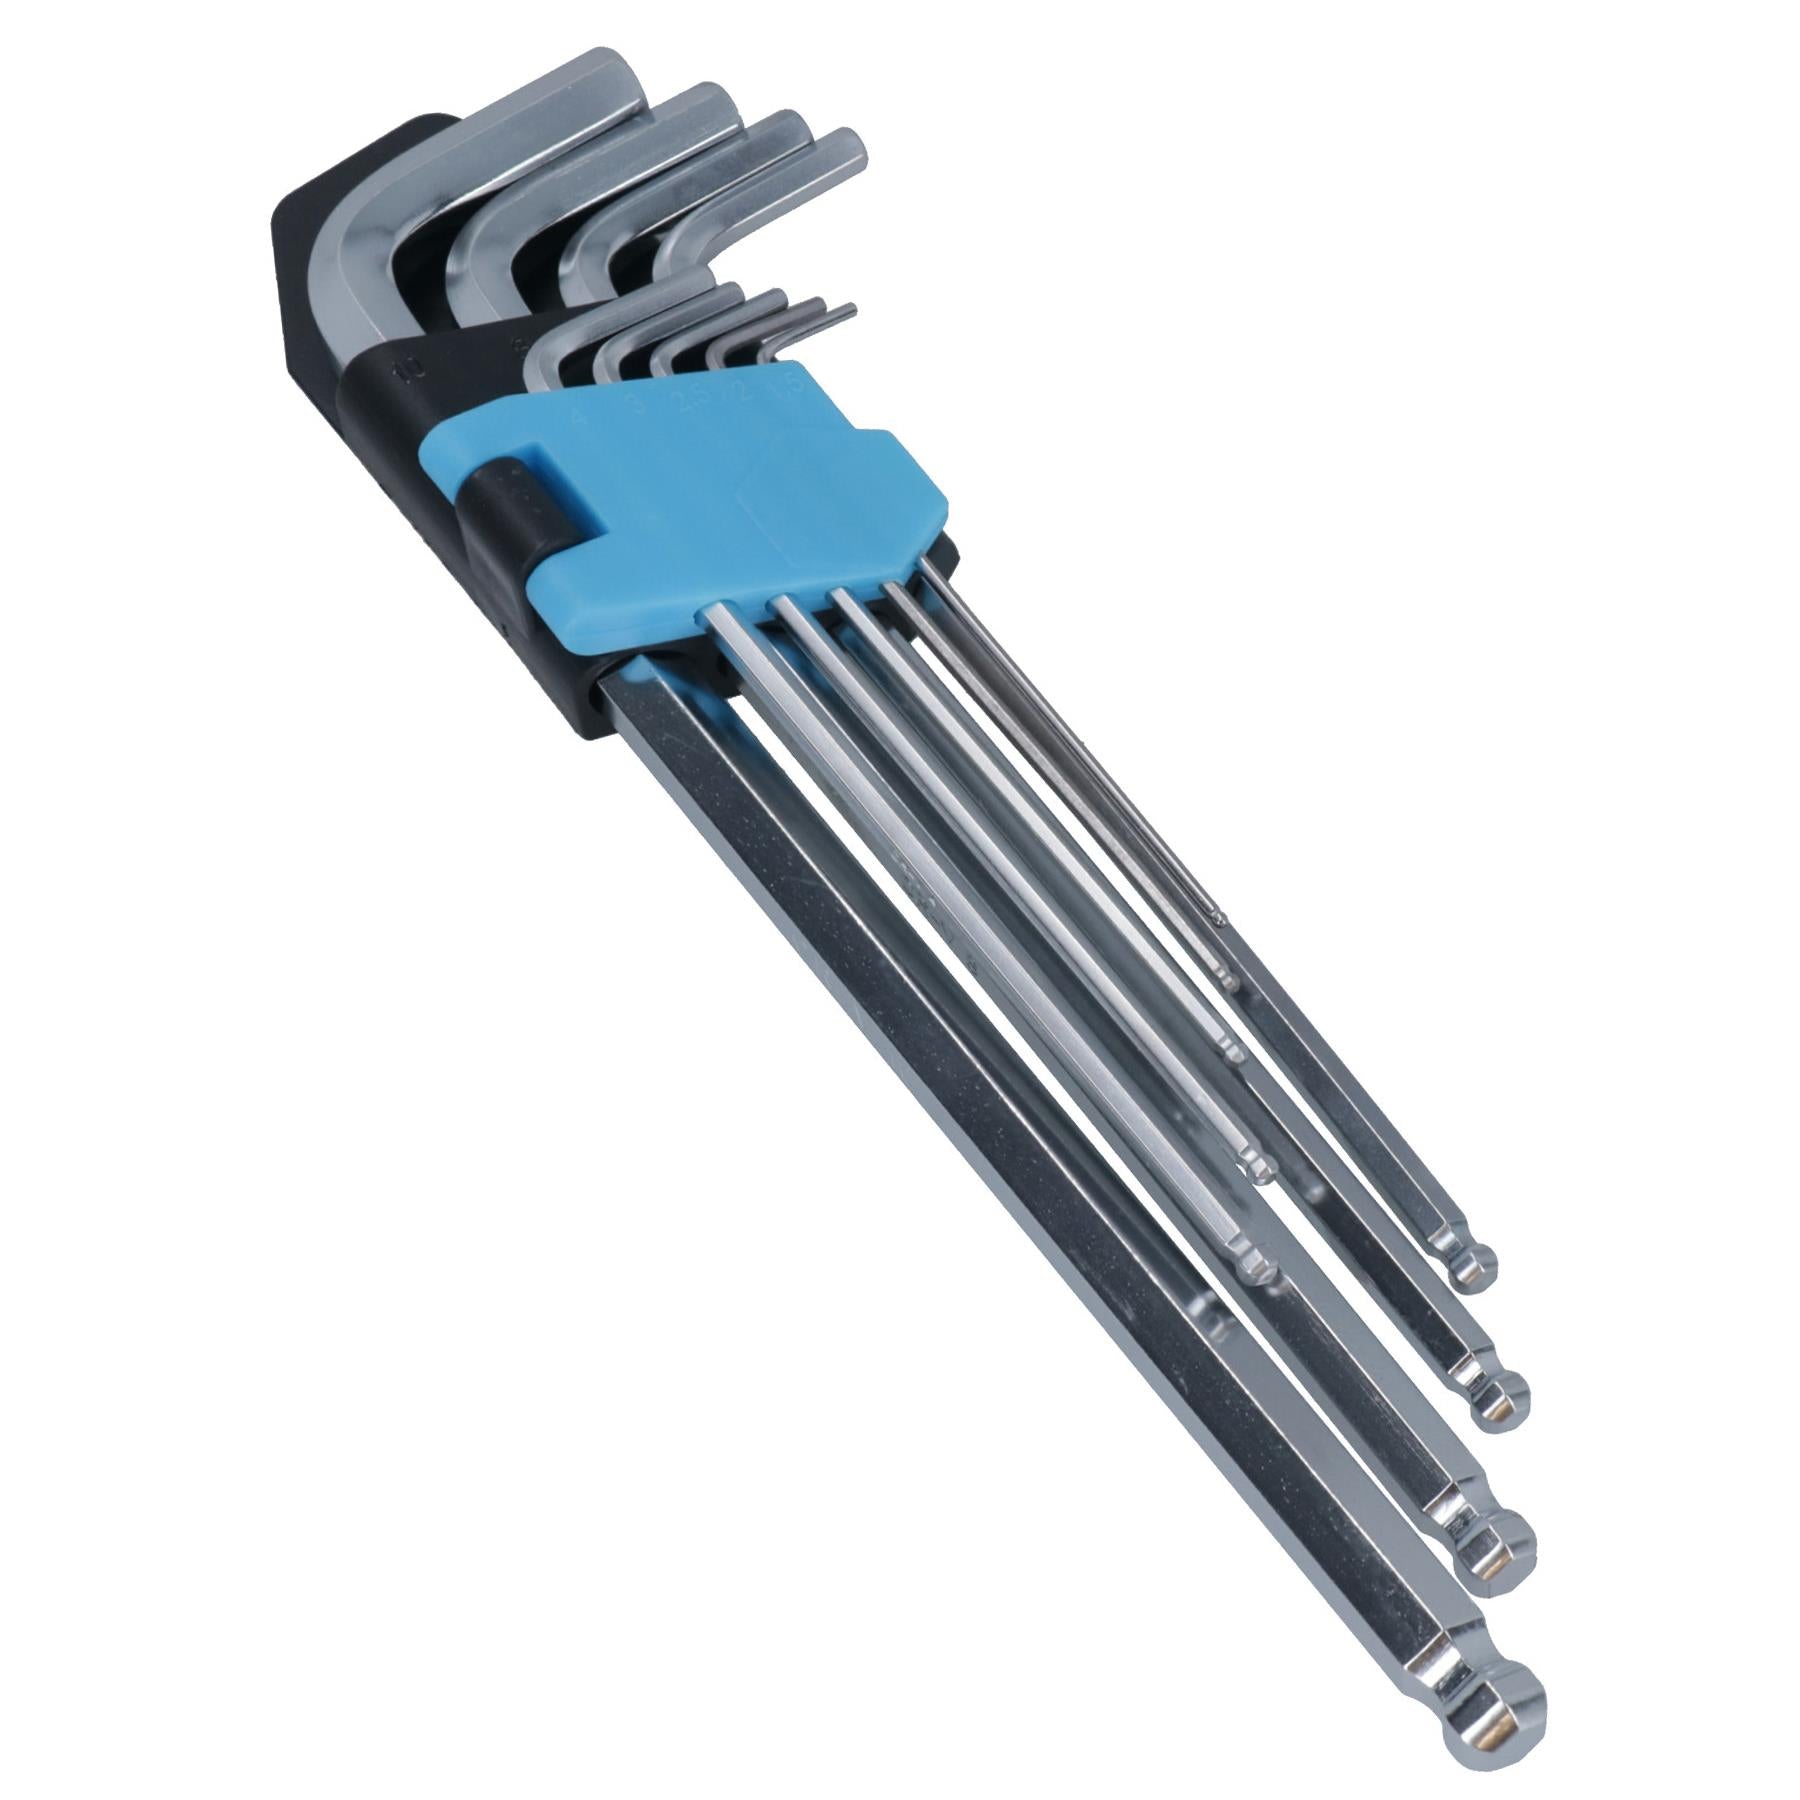 9pc Metric Ball Ended Allen Hex Keys Extra Long With Holder 1.5mm – 10mm